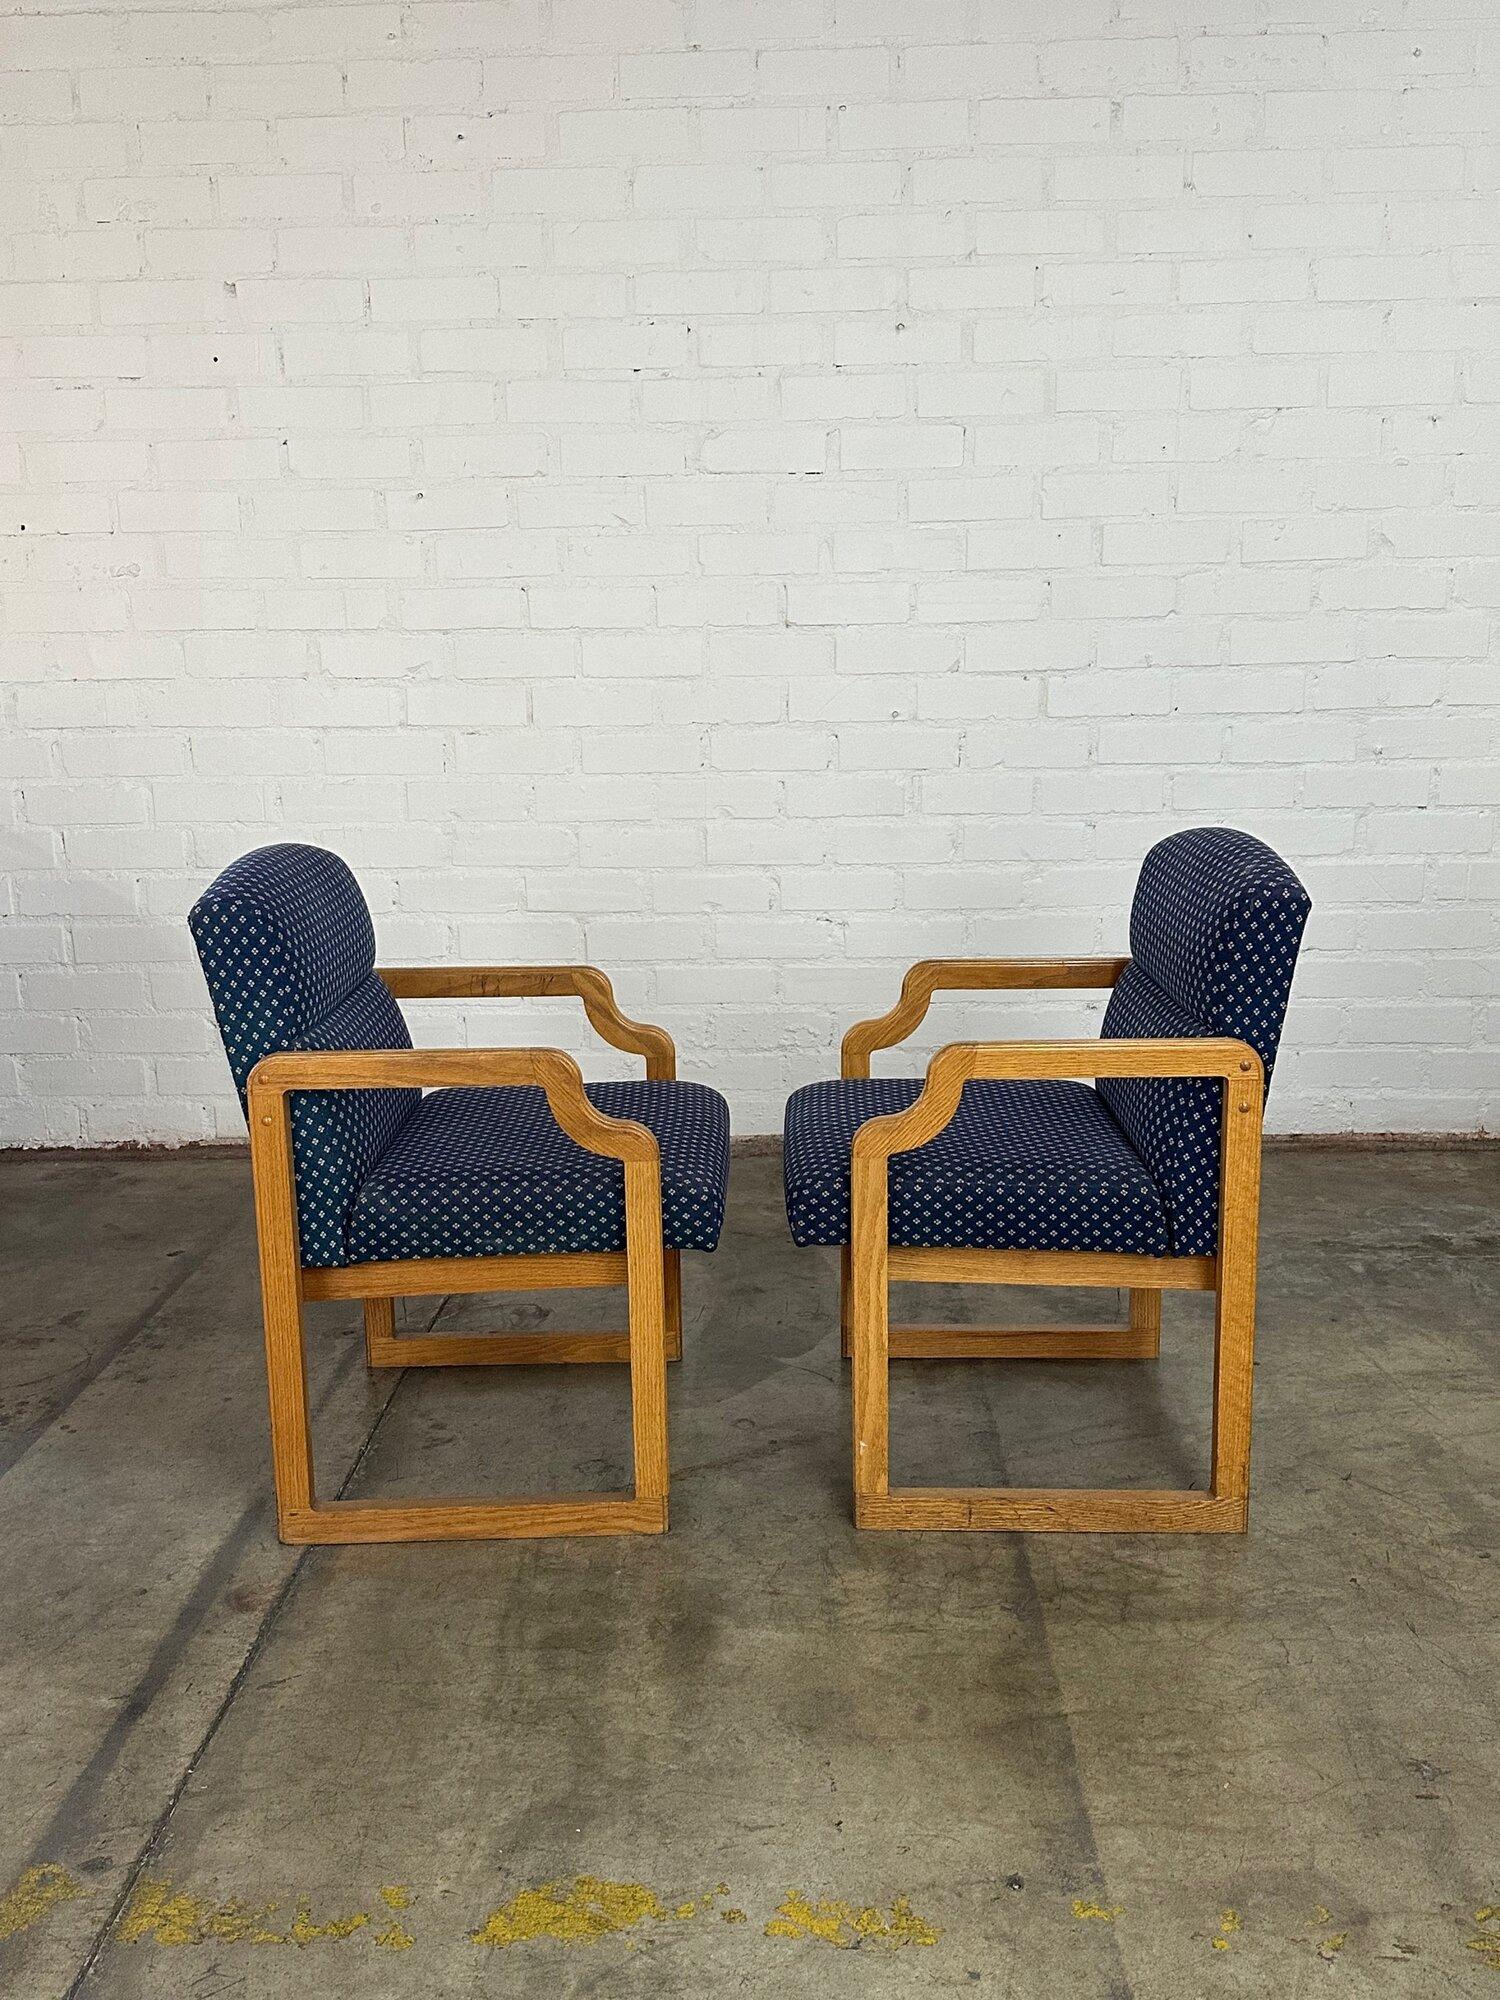 W23 D23.5 H33.5 SW20 SD18 SH17.5 AH25.5

Pair of solid oak side chairs in overall great condition. The pair is structurally sound with no visible tears in fabric or breaks in the wood.